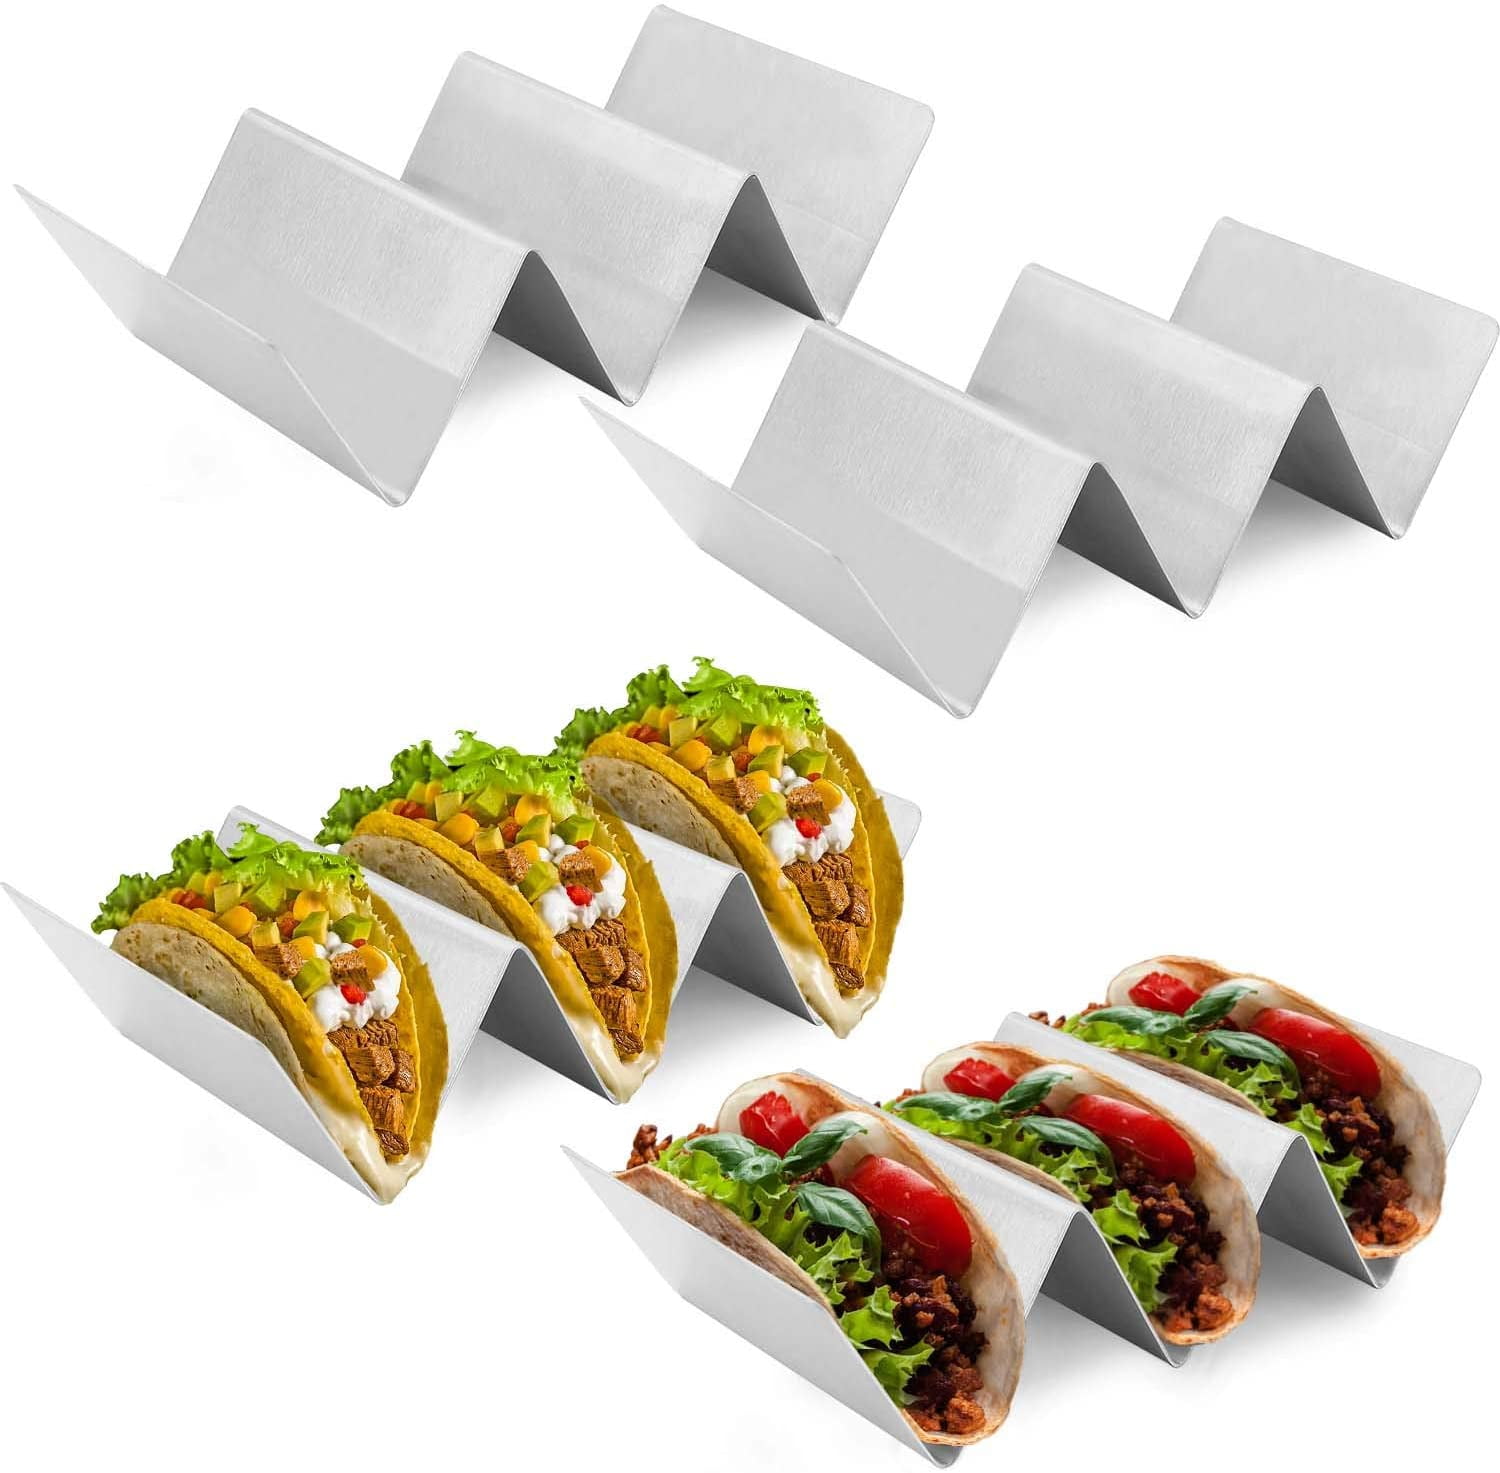 Taco Holders Stands Stainless Steel Set Taco Stand Rack Tray Style Holds Up to 4 Tacos Each for Soft & Hard Shell Tacos Taco Holders 